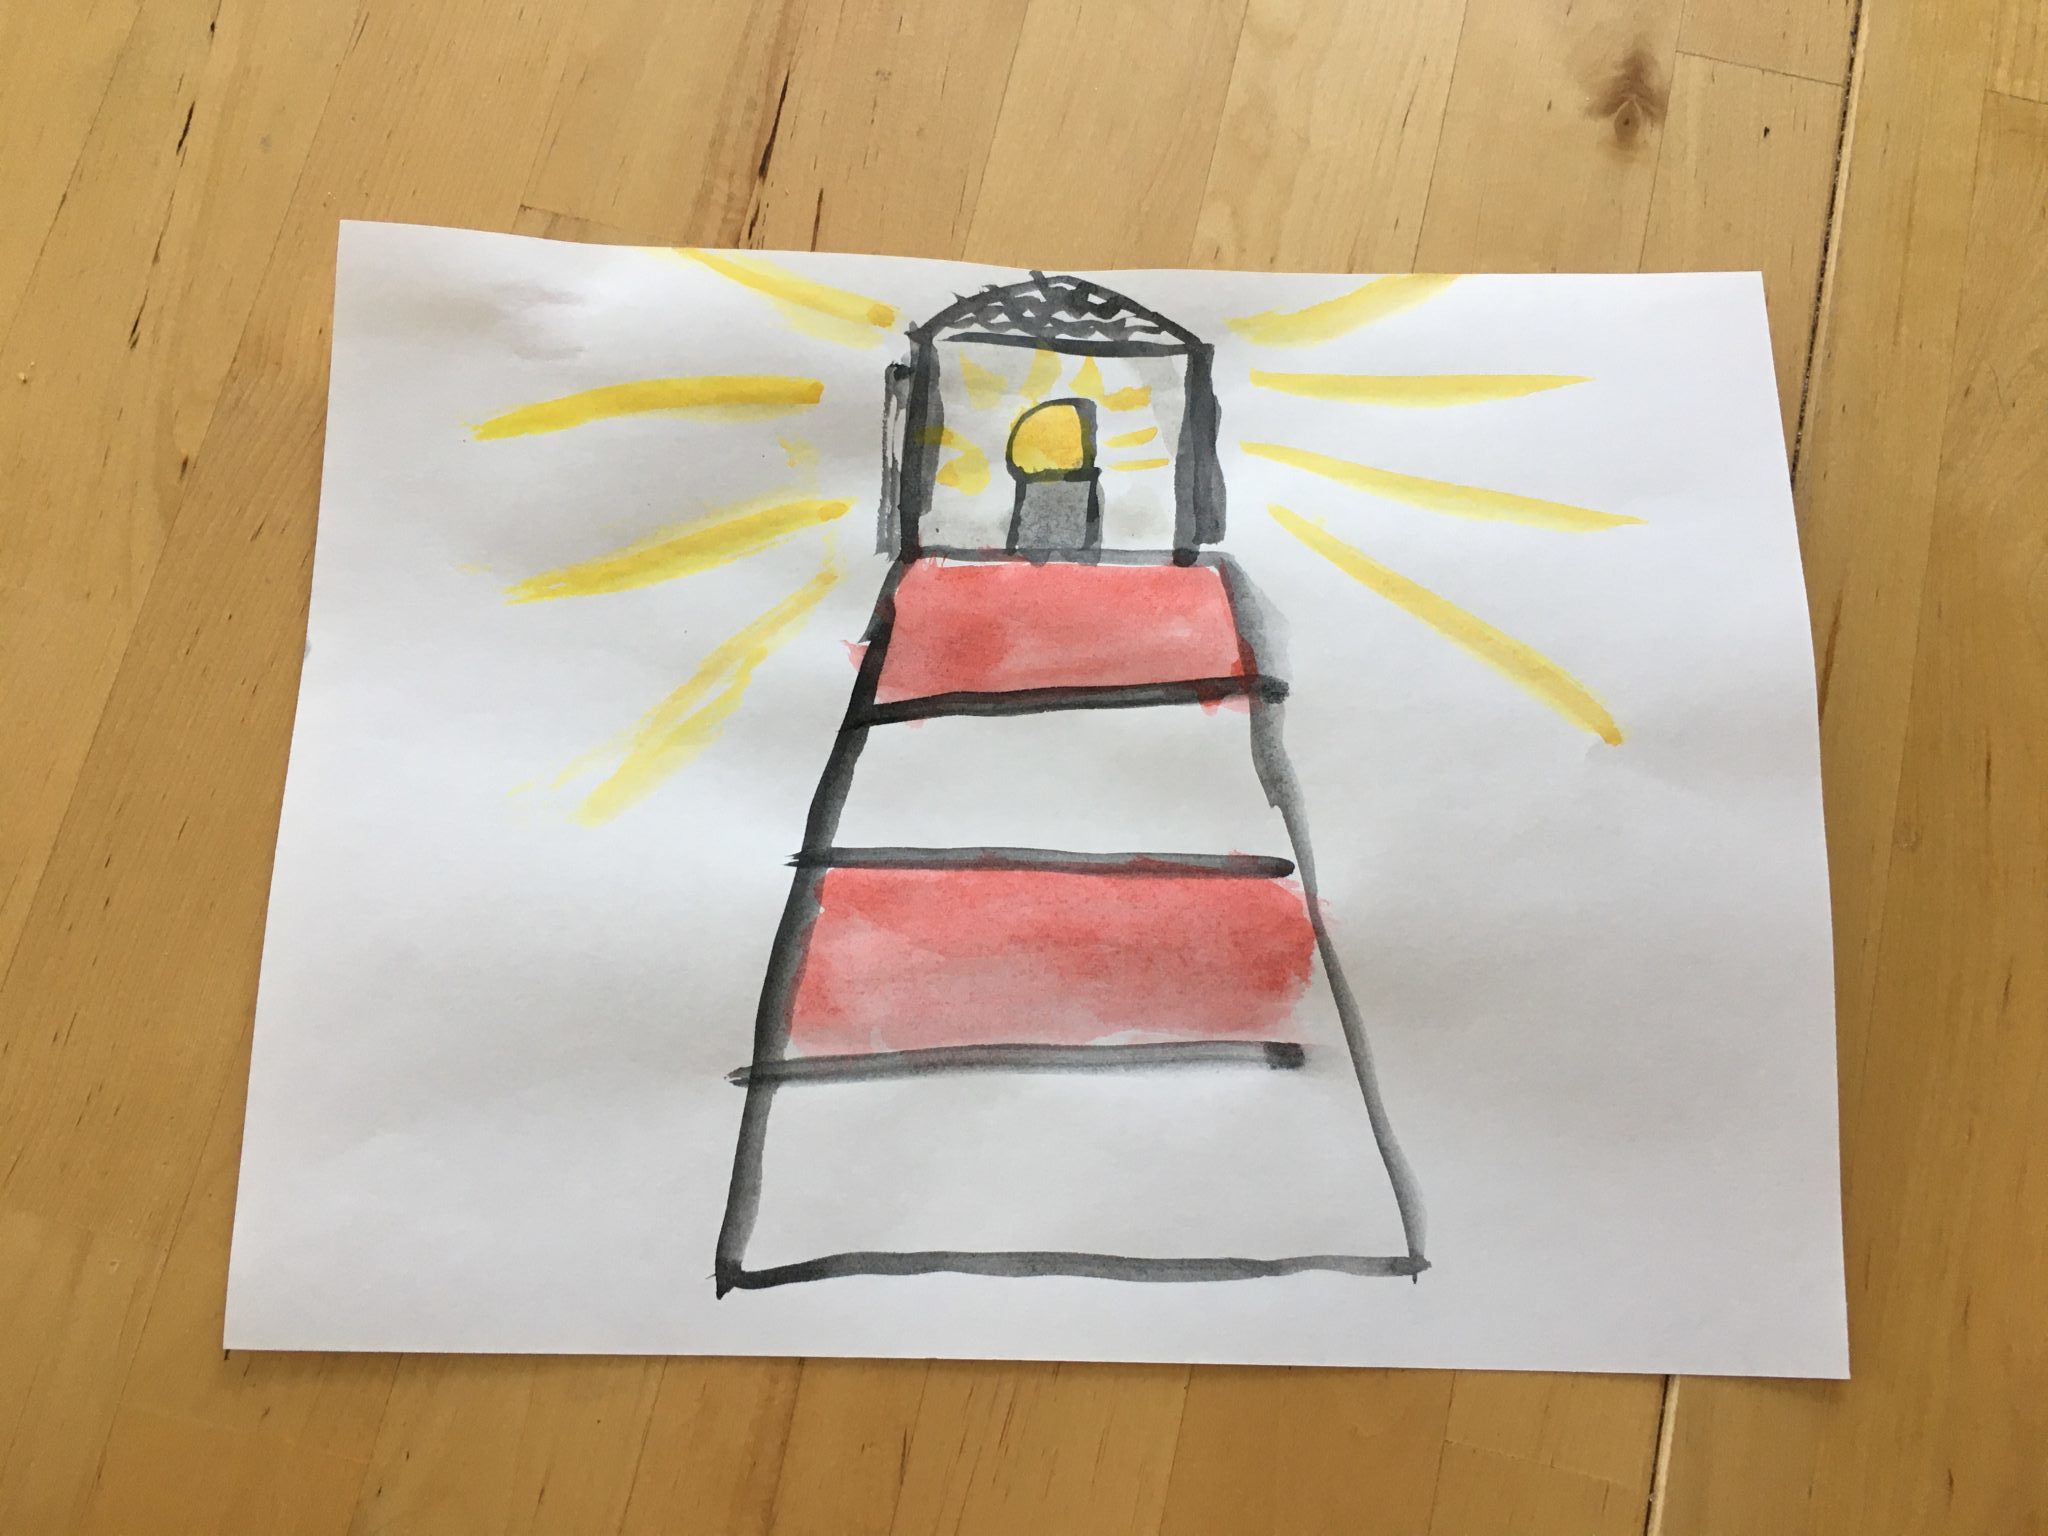 Watercolor painting of a lighthouse